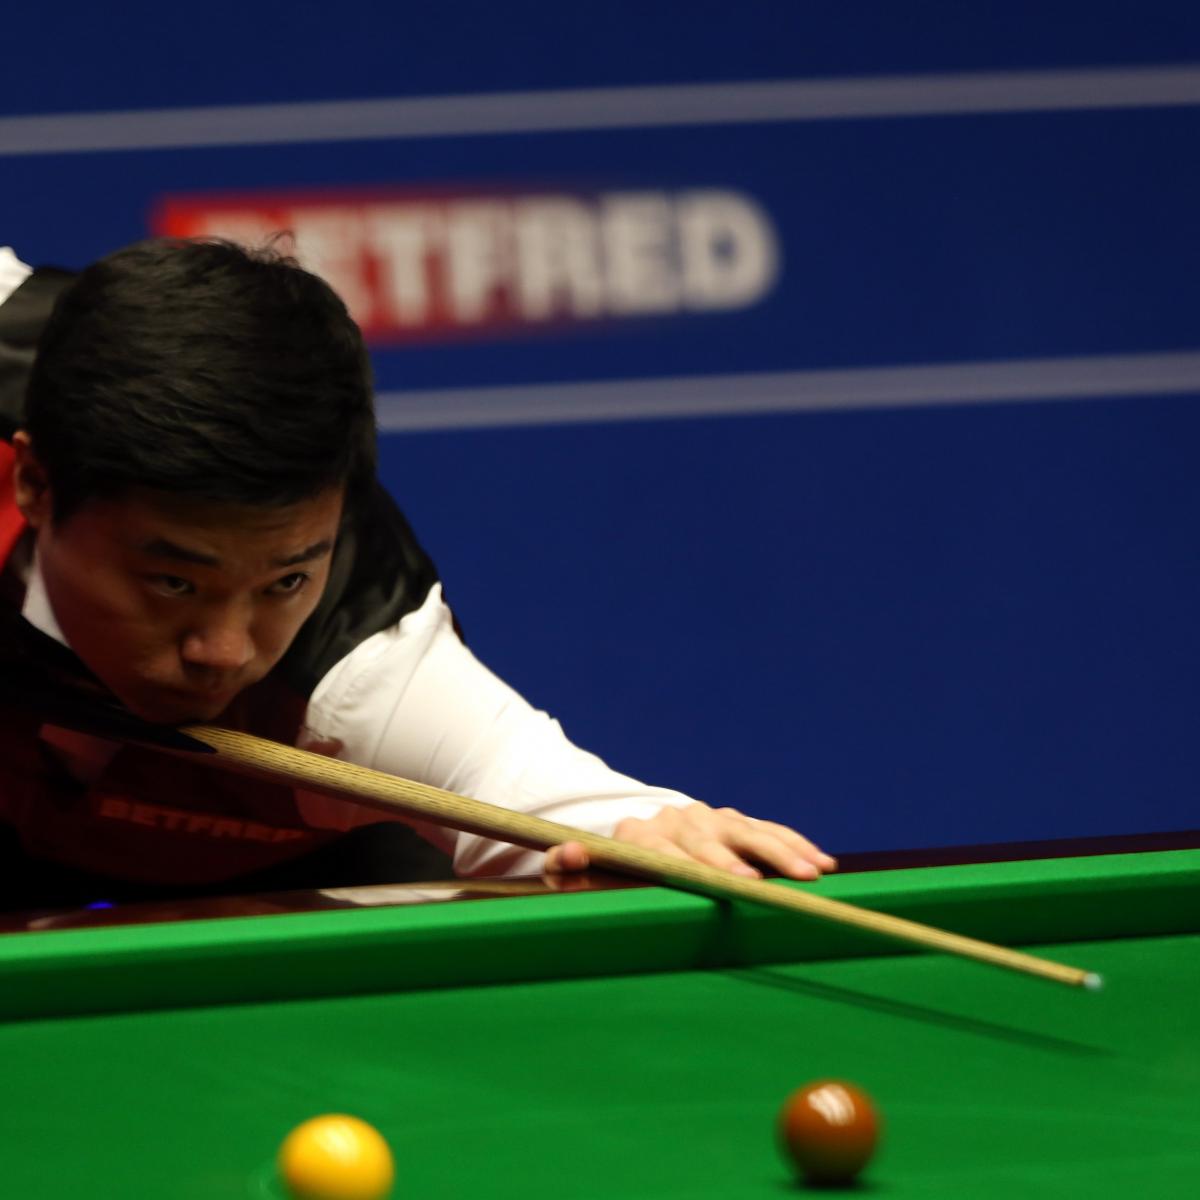 World Snooker Championship 2016 Results: Latest Schedule After Friday's